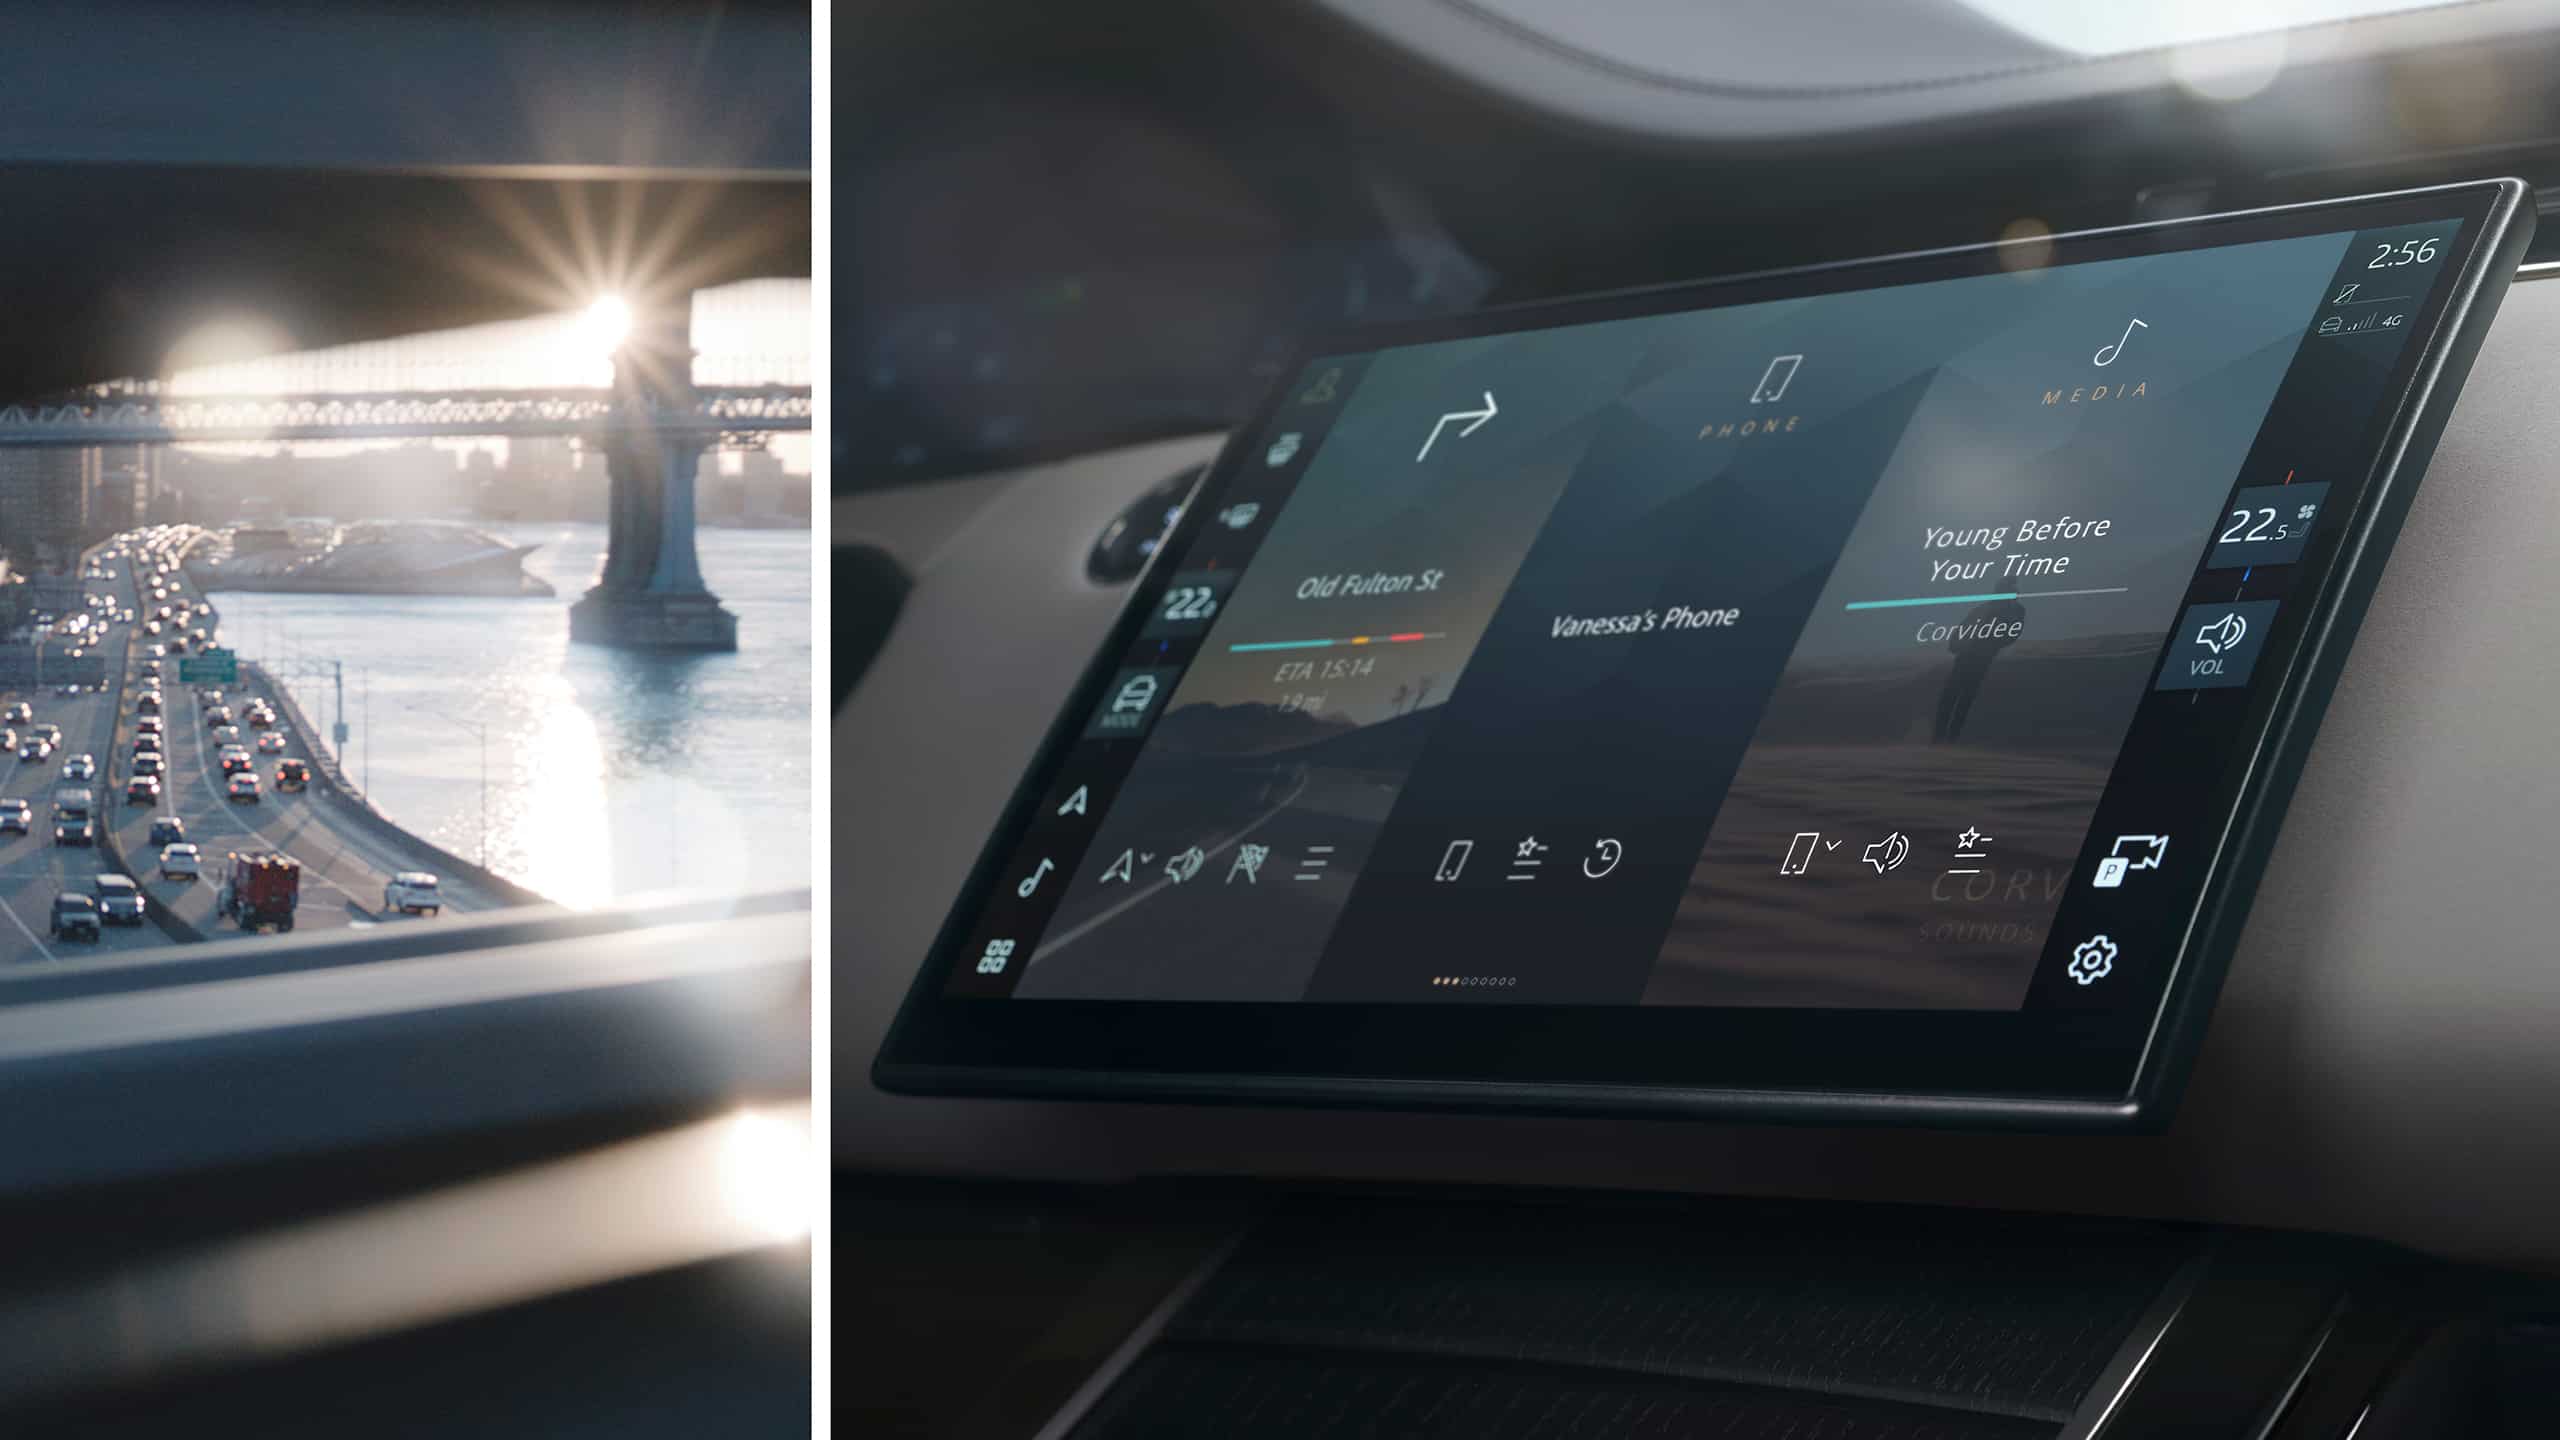 Montage of the Range Rover Evoque  infotainment system & city highway